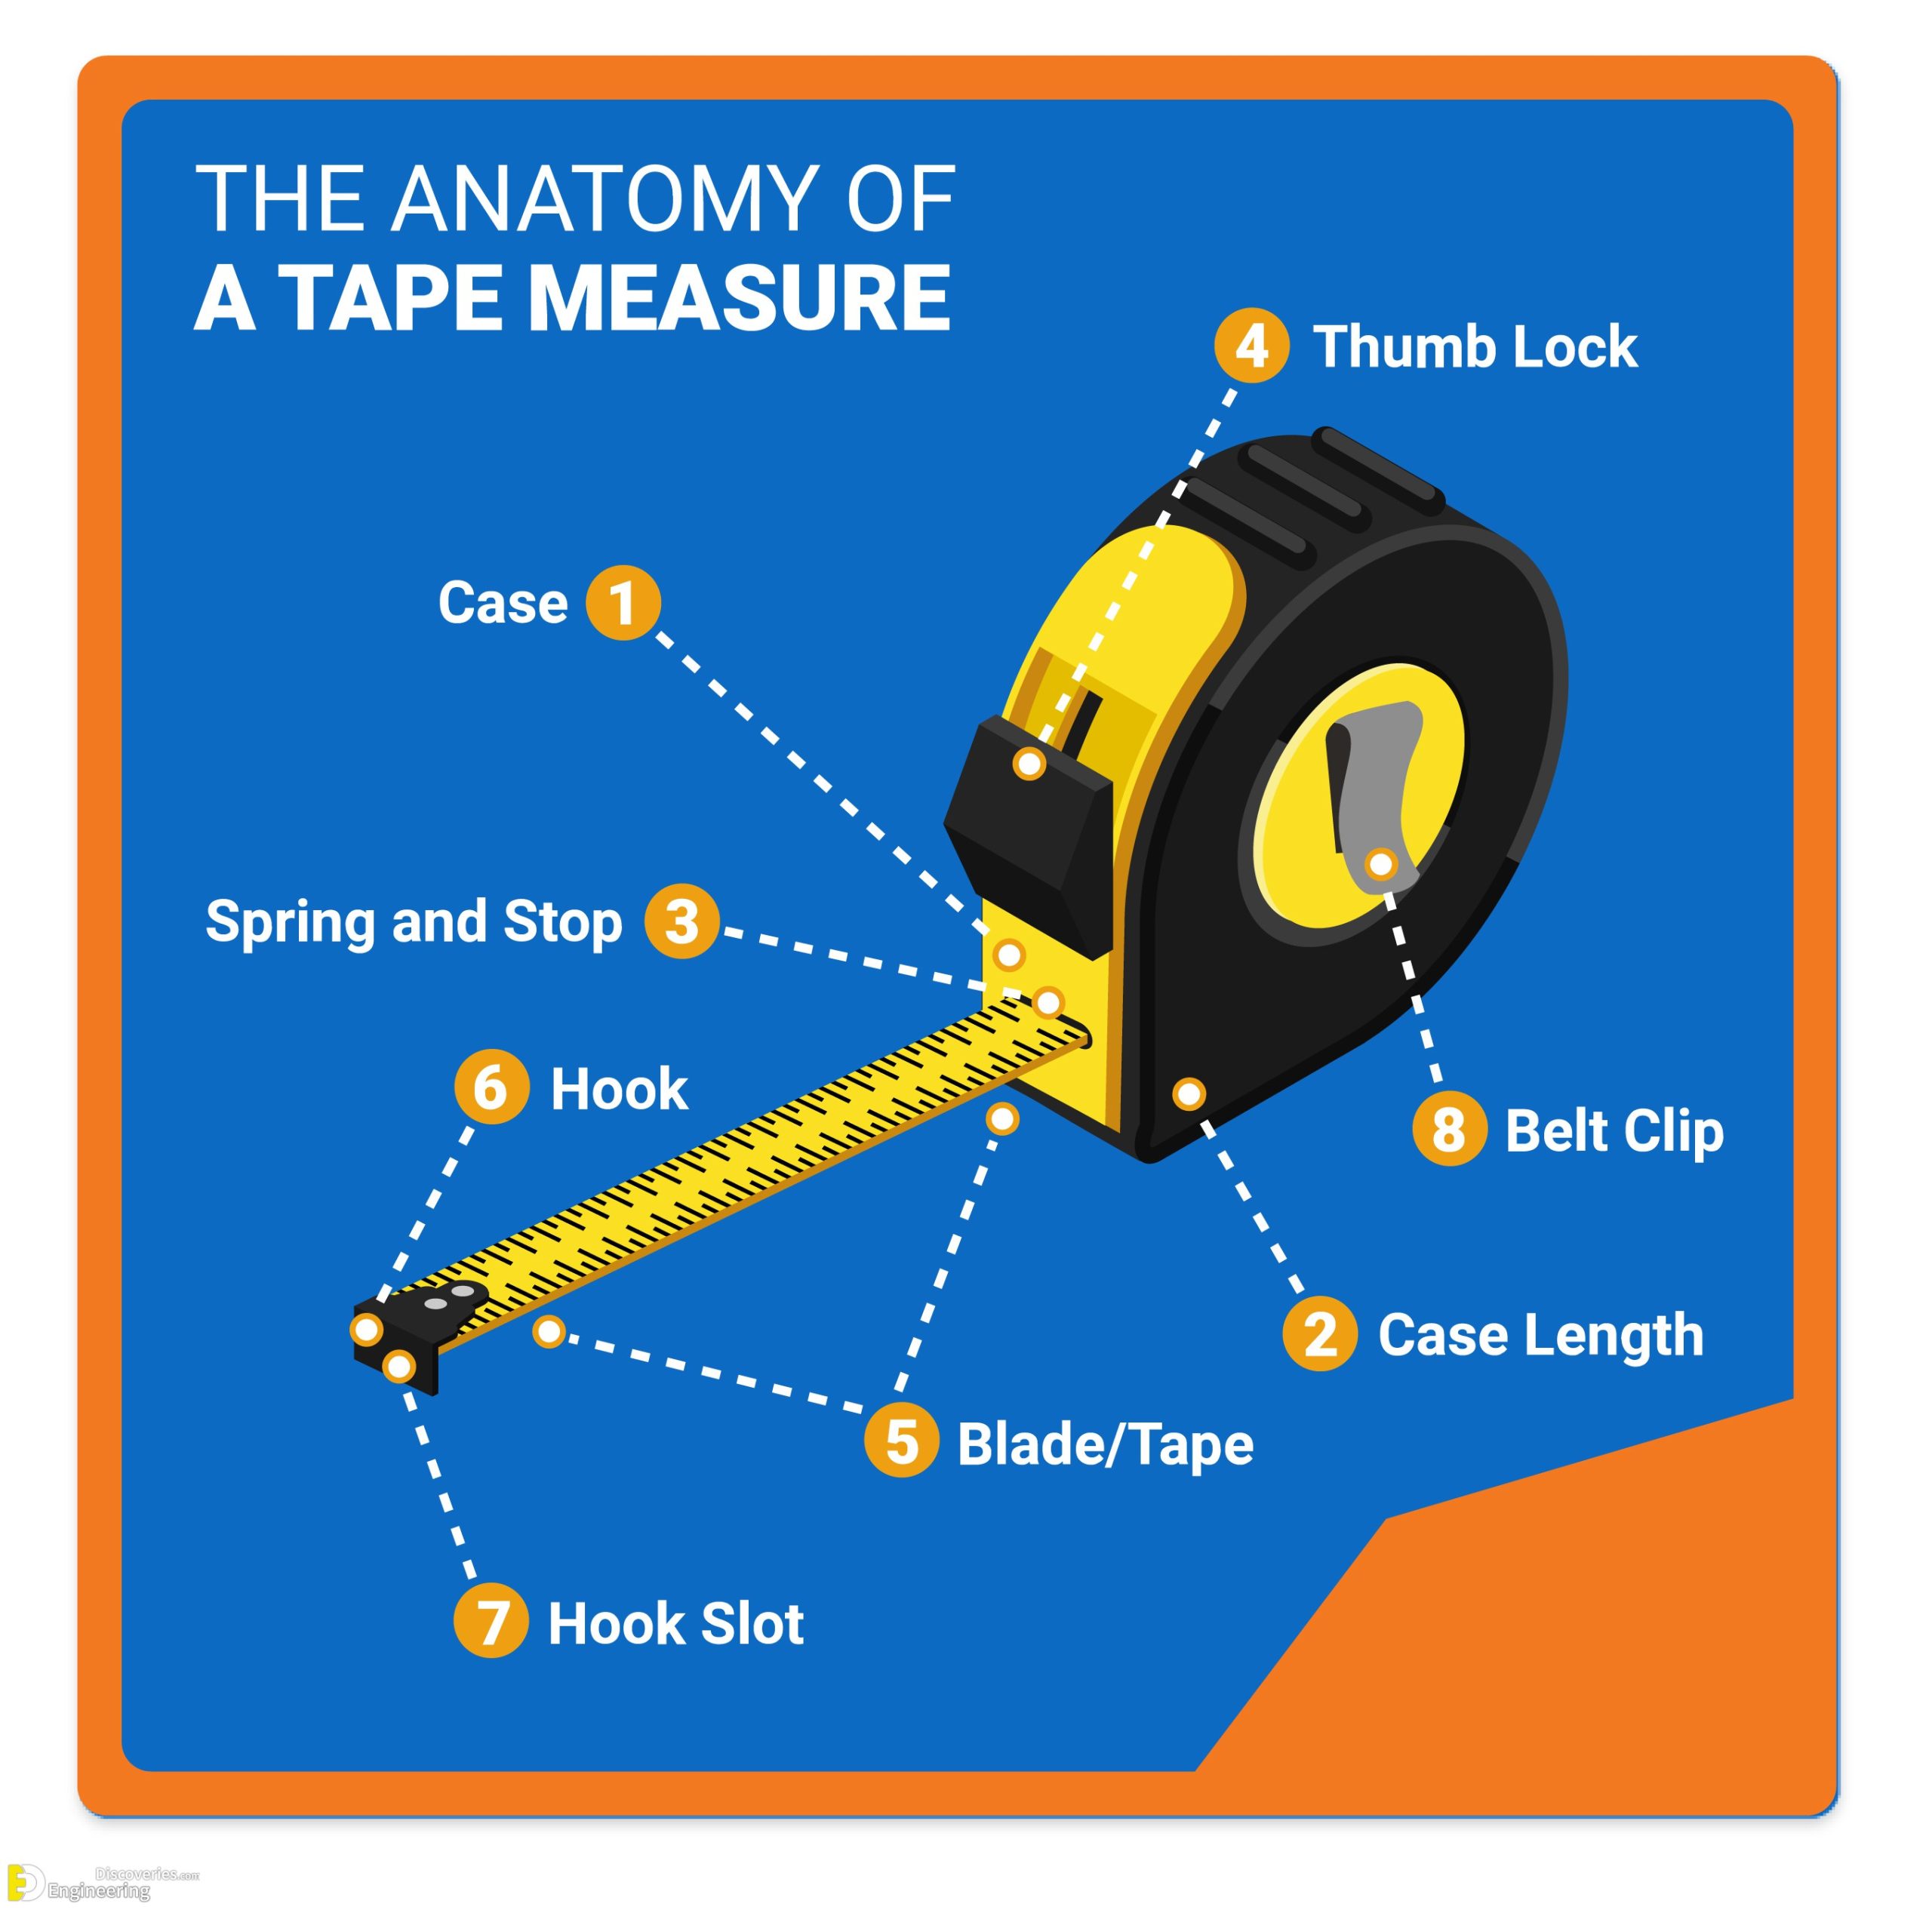 https://engineeringdiscoveries.com/wp-content/uploads/2023/05/1-engineering-discoveries-how-to-read-a-tape-measure-and8211-tips-tricks-and038-mistakes-to-avoid-scaled.jpg